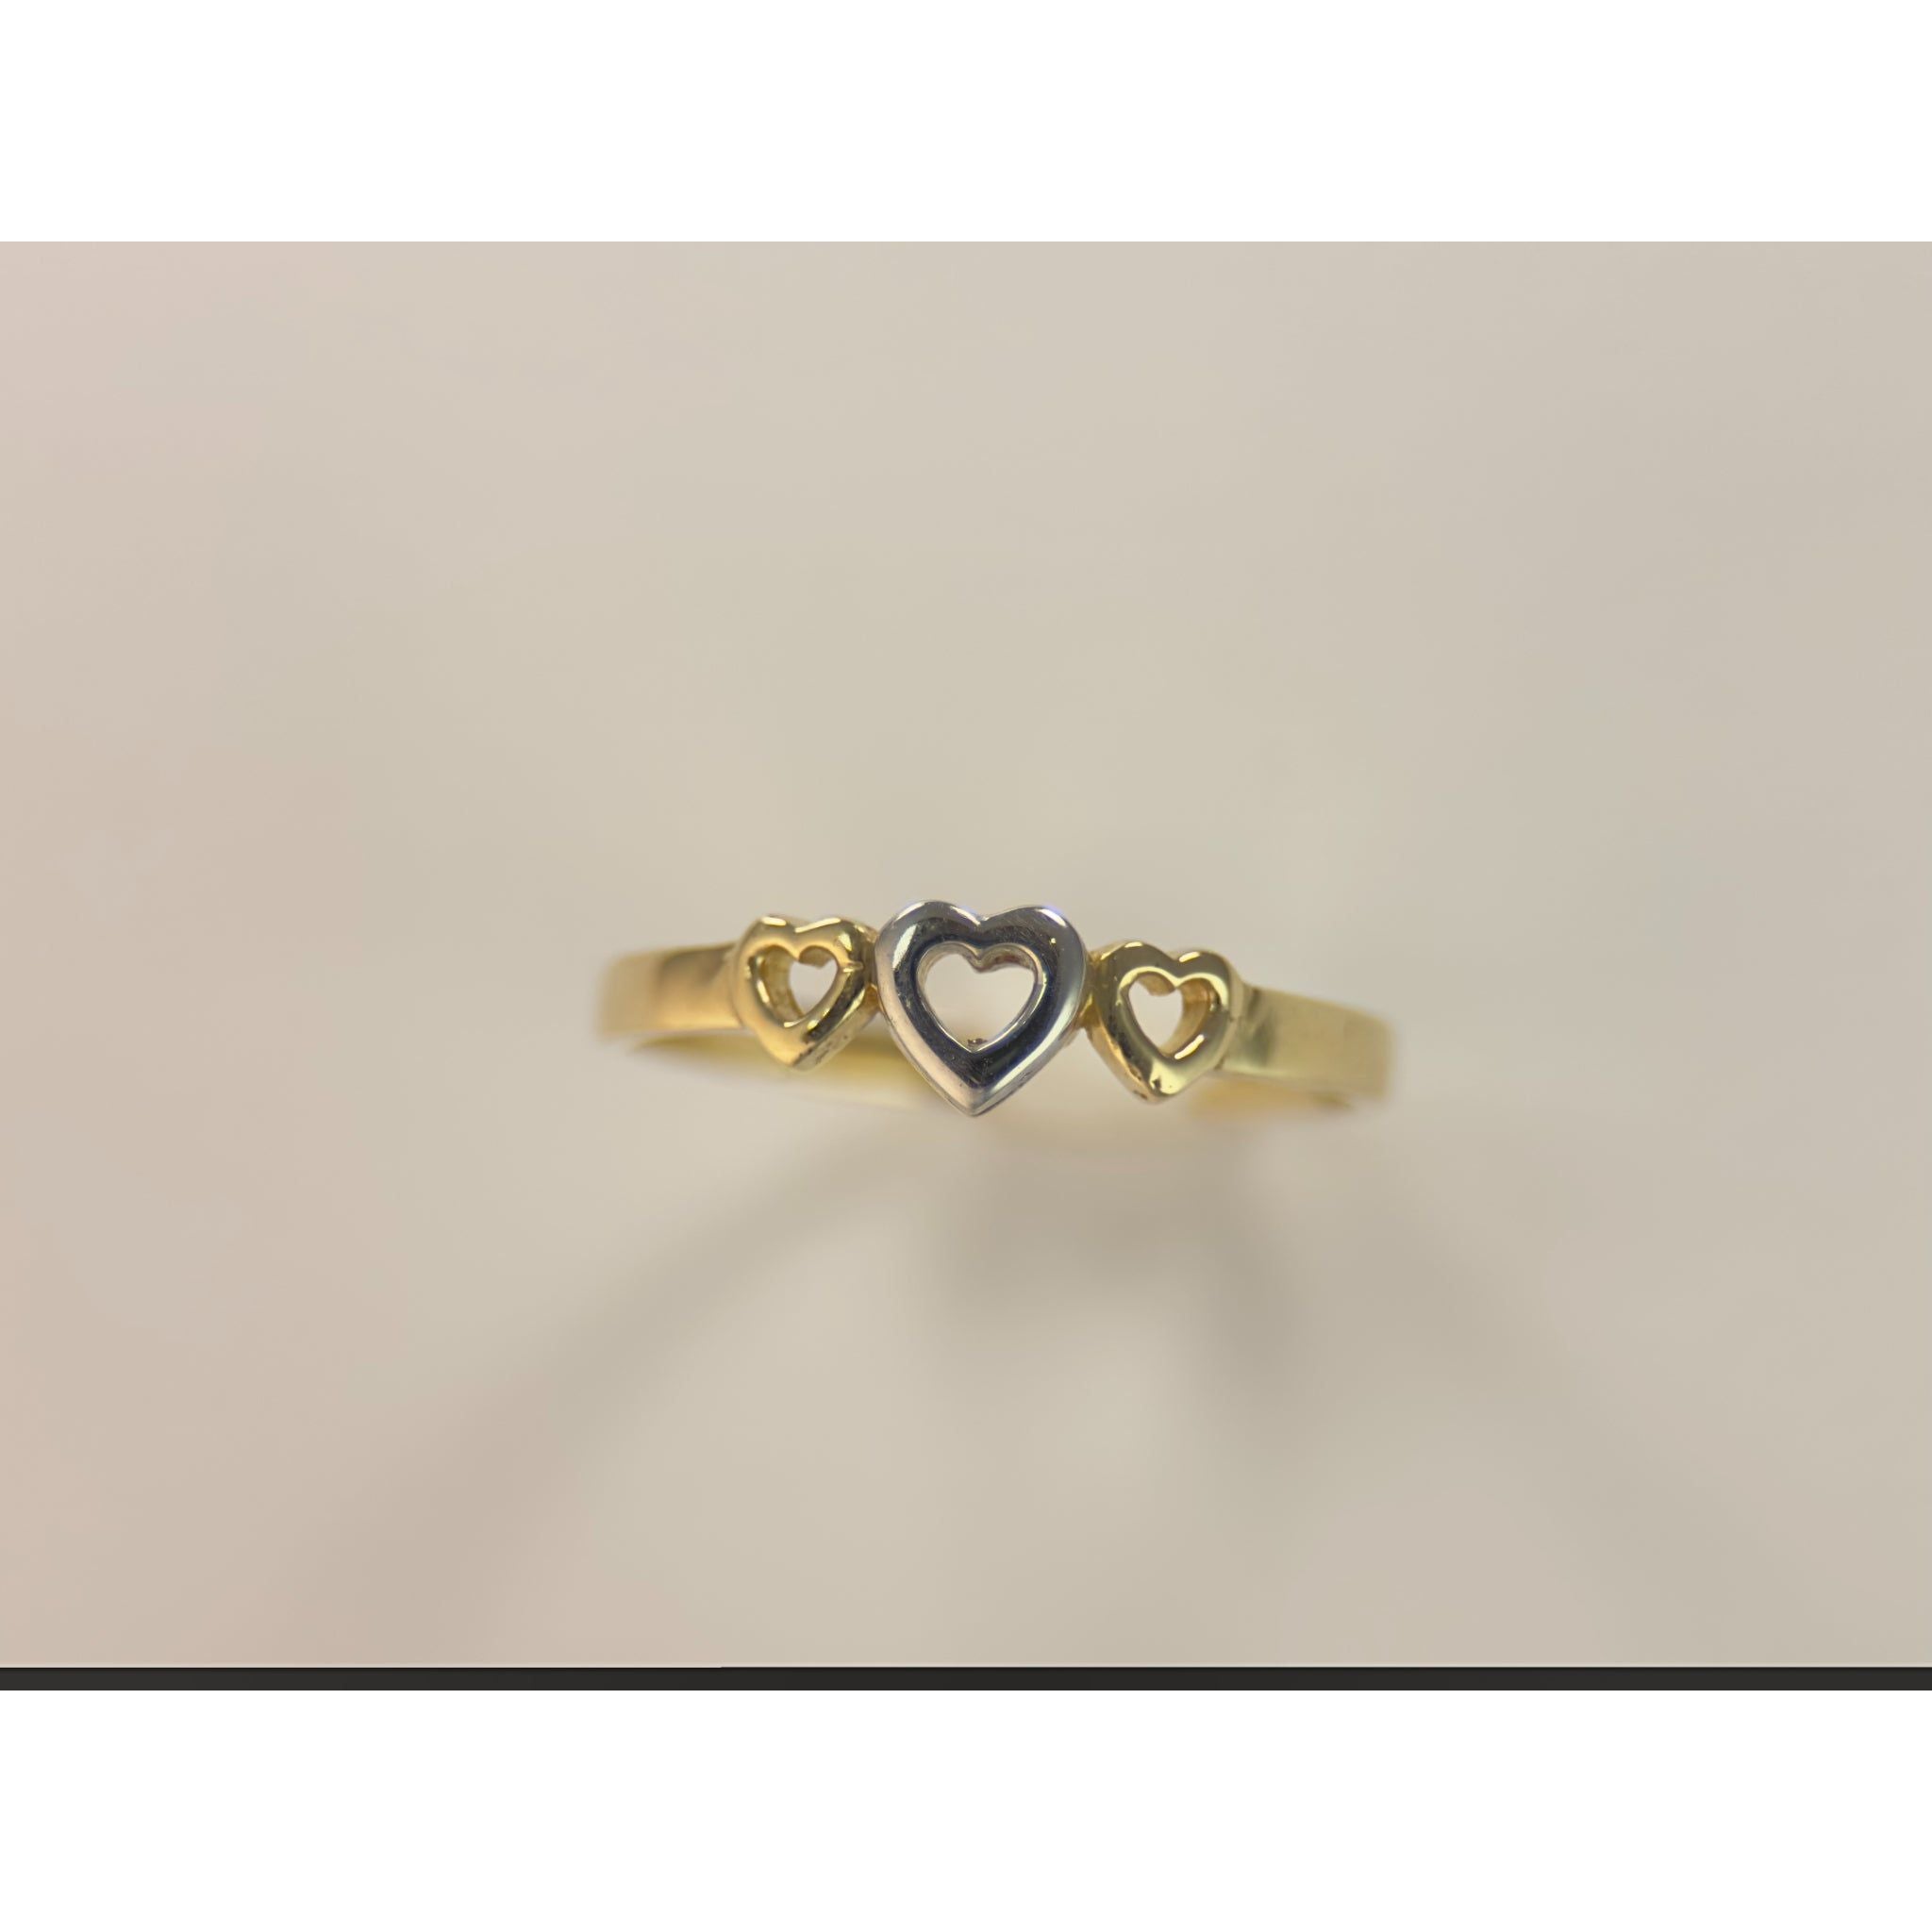 DR2020 - 14K Yellow Gold - Ladies Gold Rings - 3 Hearts w/ 14K WG Center Heart